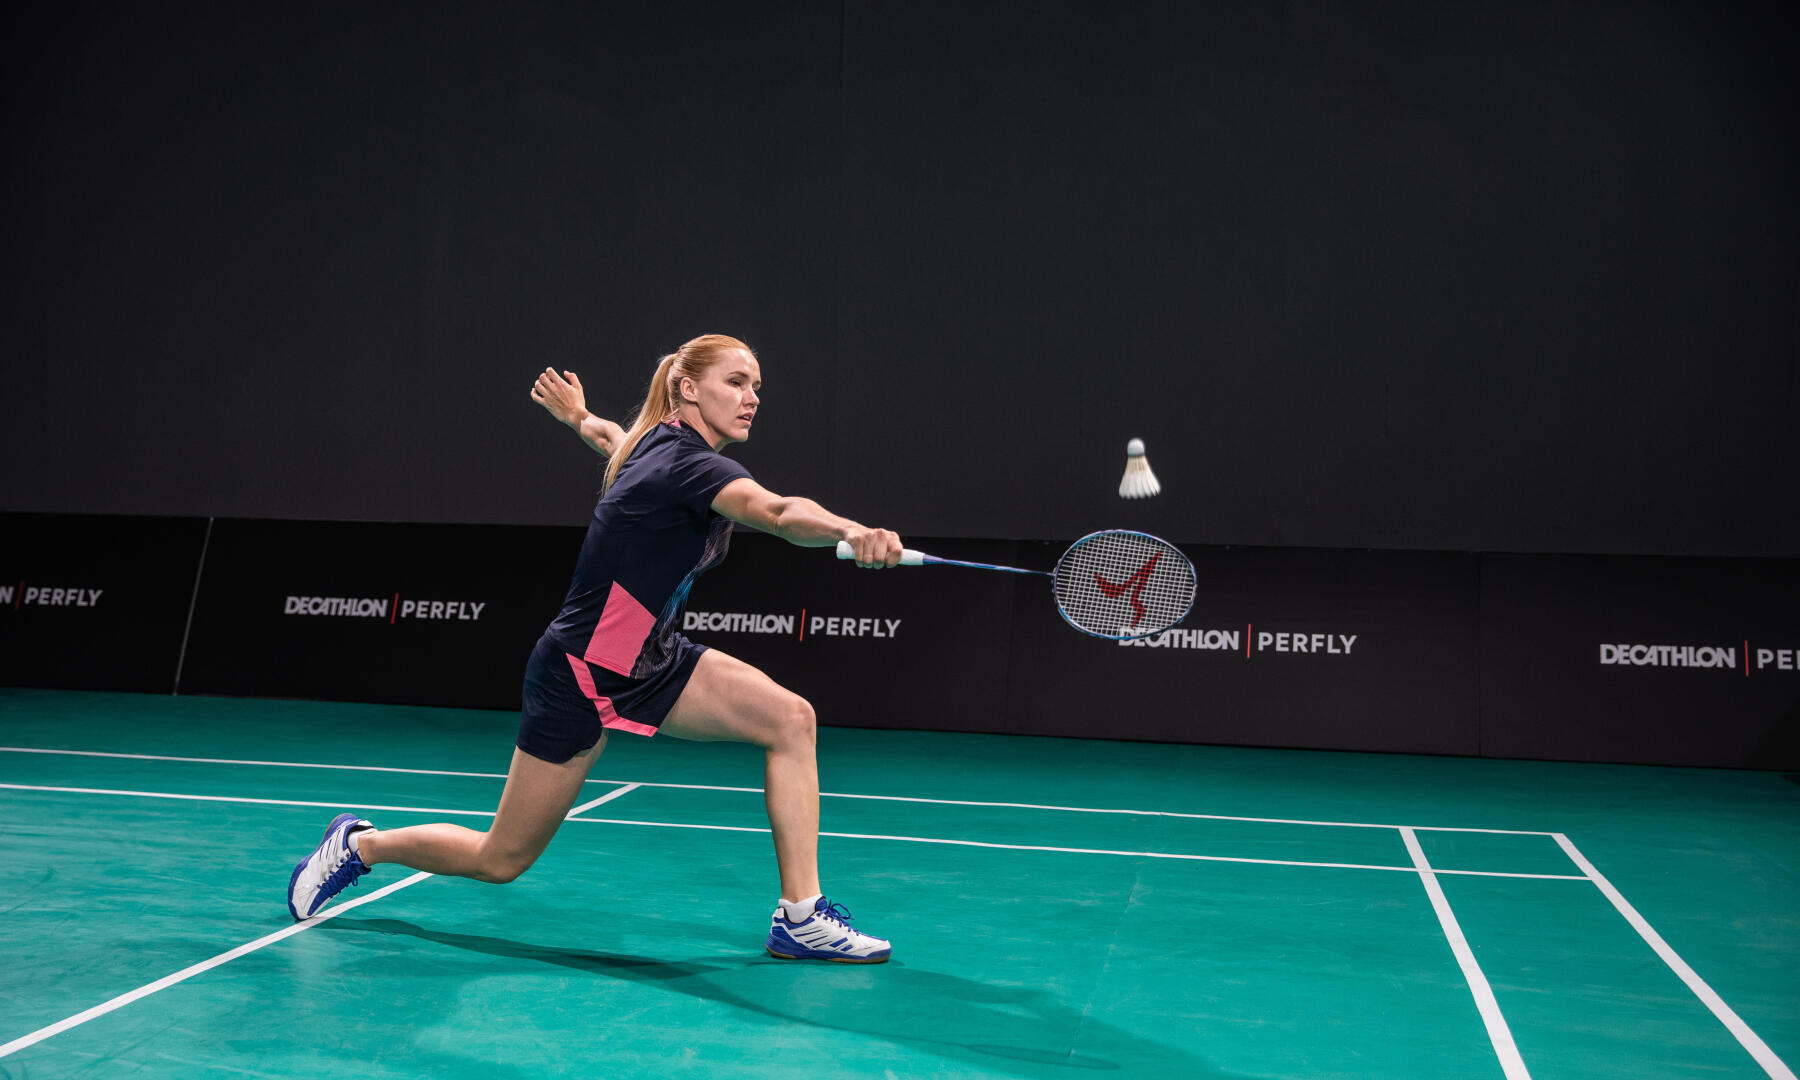 Badminton | How to Choose The Right Badminton Racket?